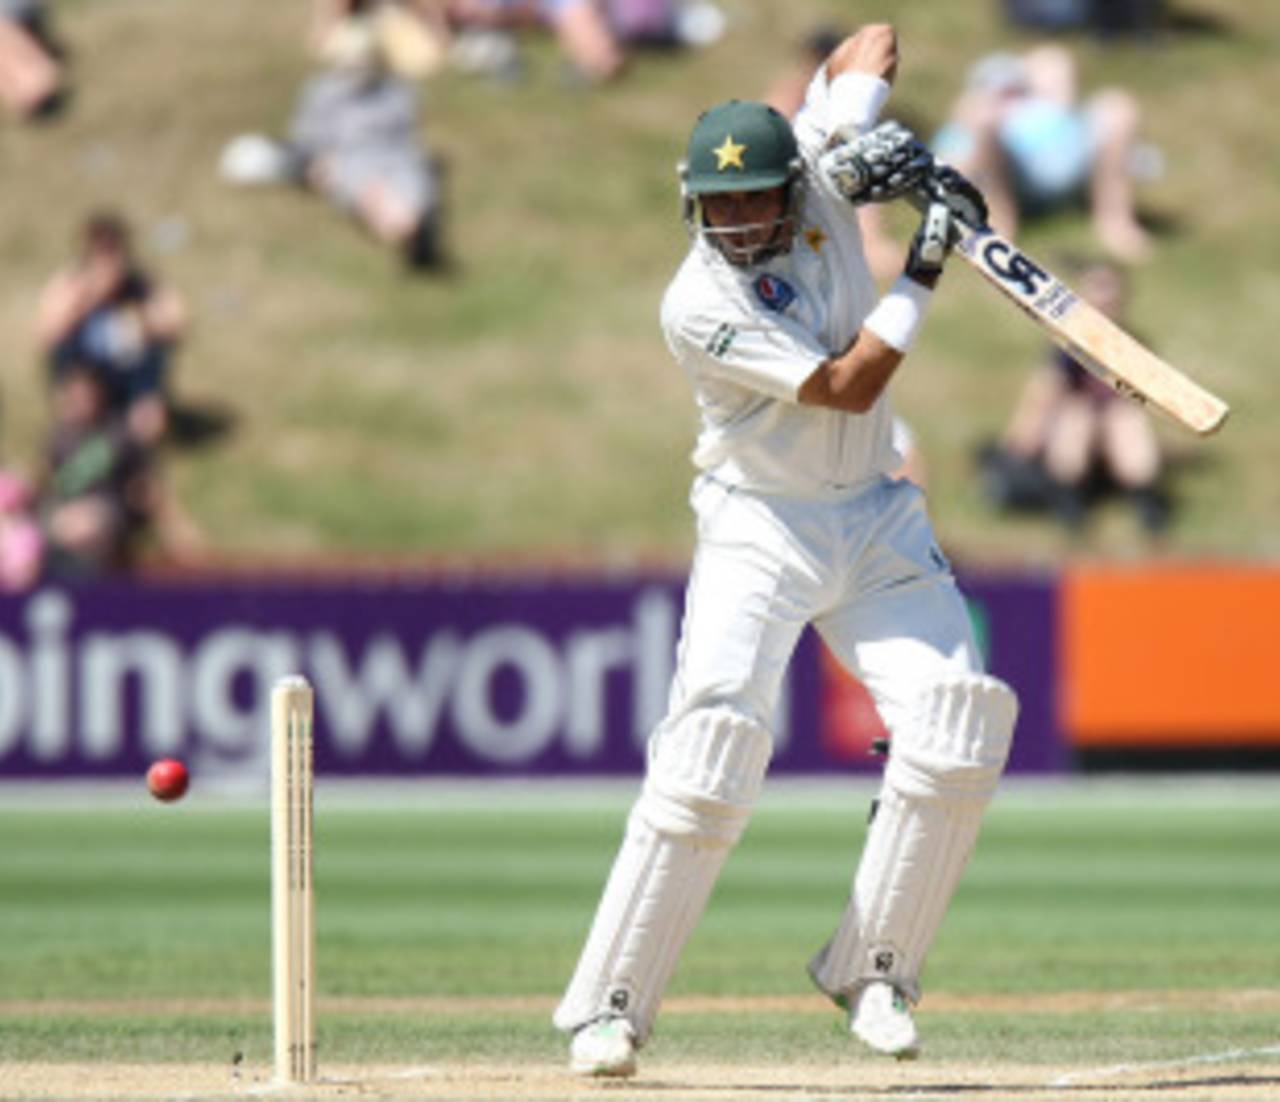 Misbah-ul-Haq defended patiently to lead Pakistan to a series victory on the final day at Basin Reserve&nbsp;&nbsp;&bull;&nbsp;&nbsp;Getty Images